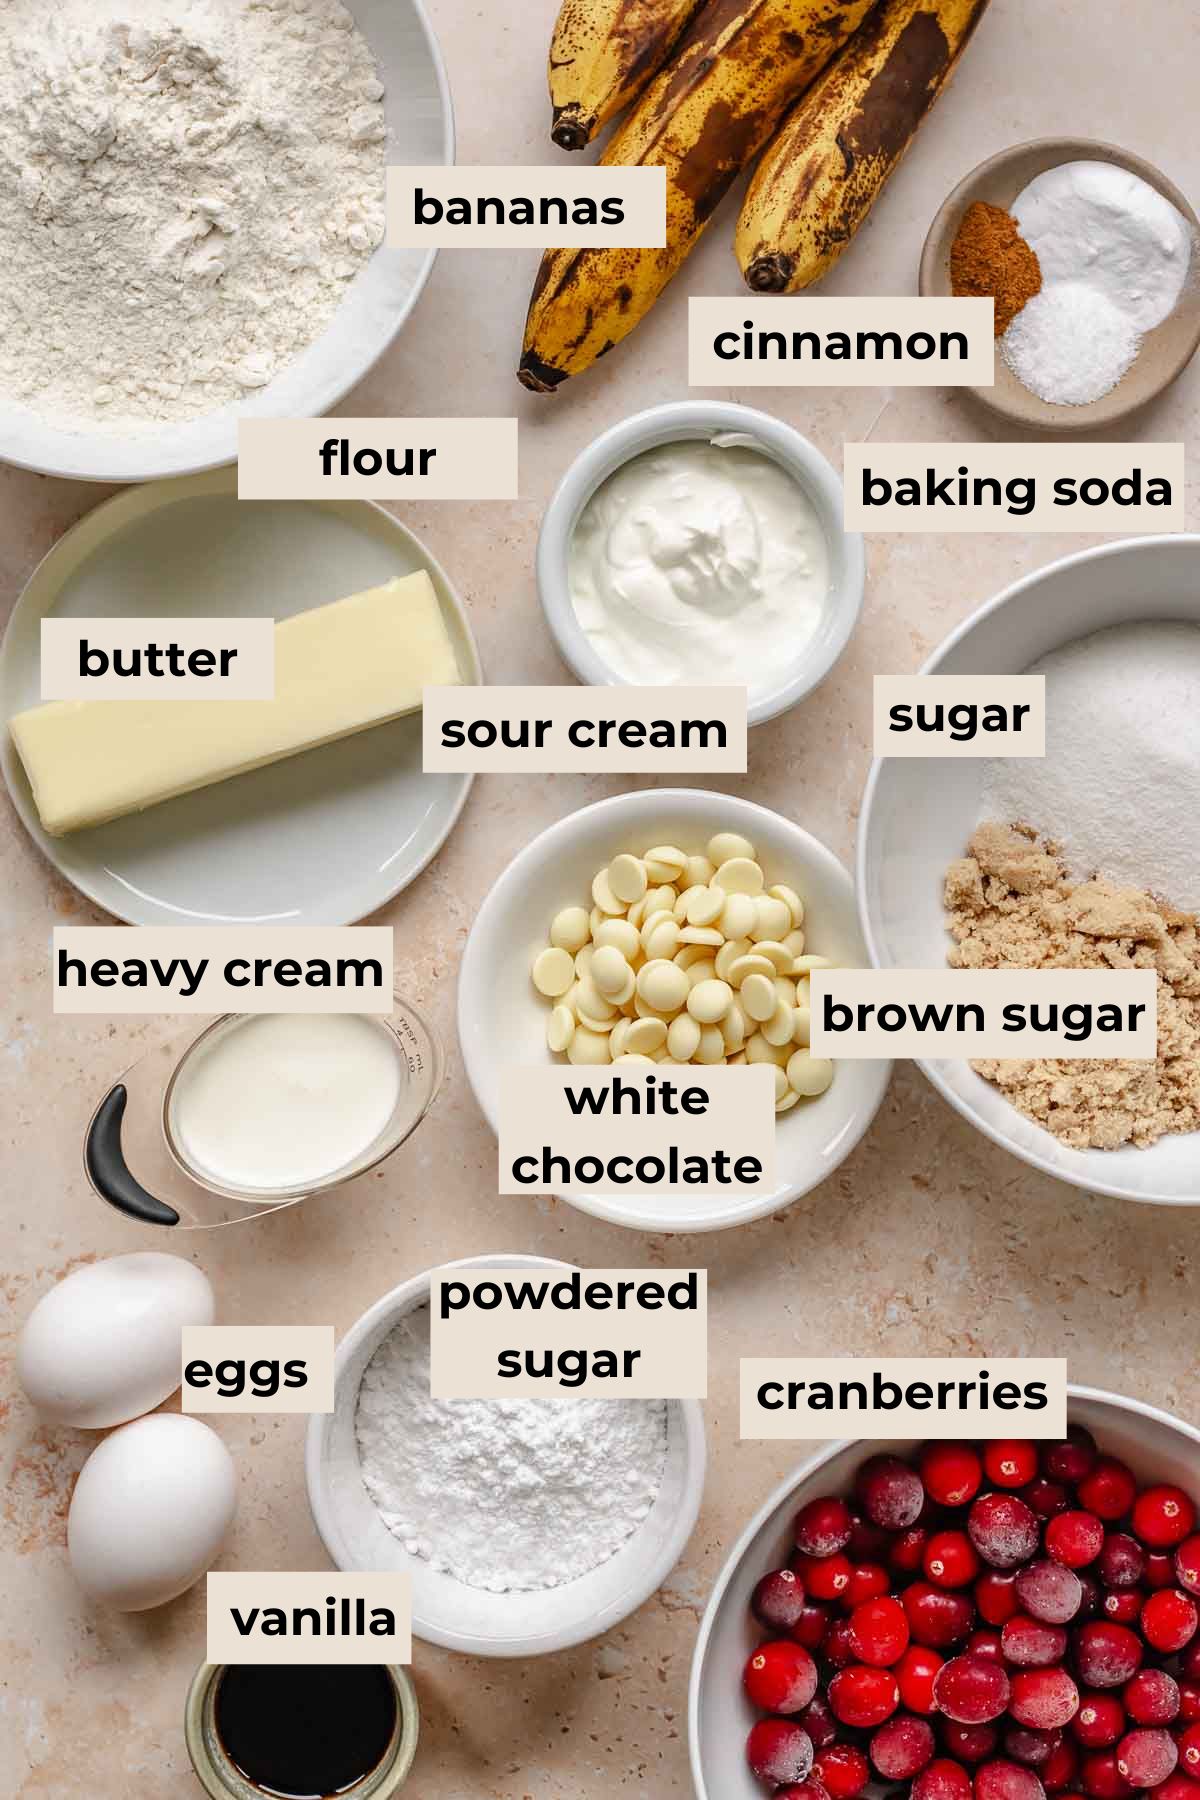 Ingredients for cranberry banana bread.